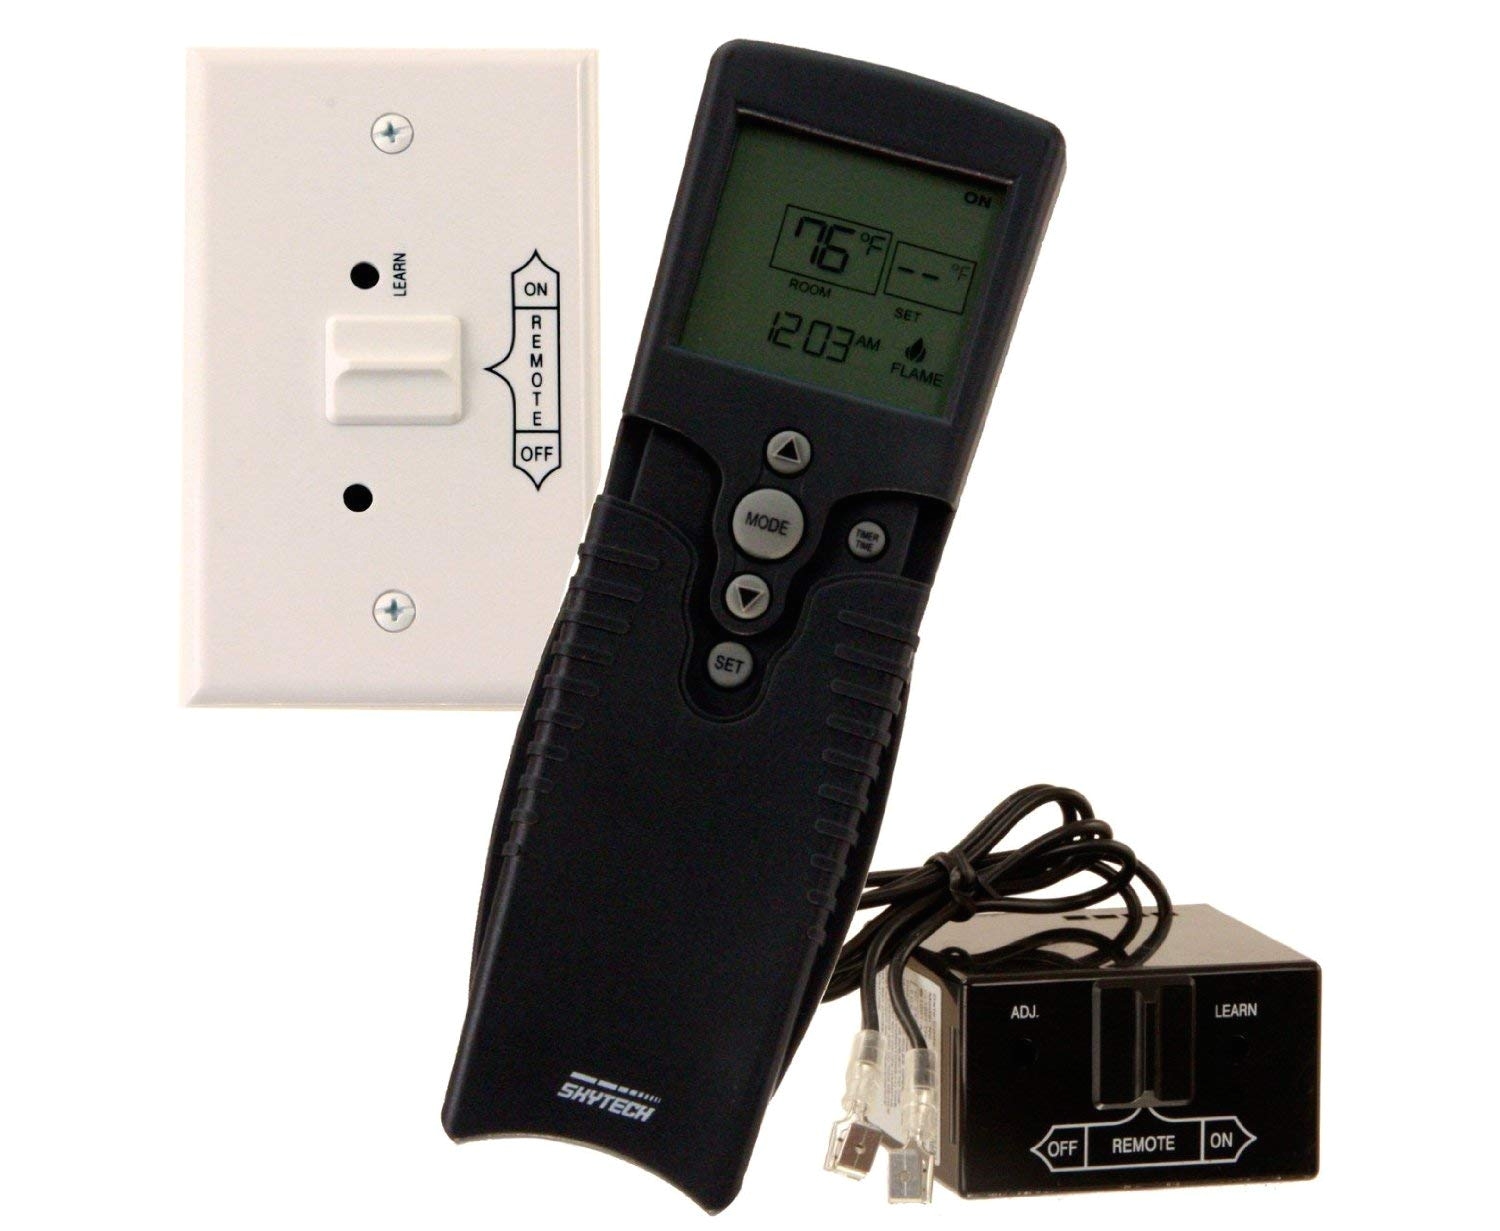 amazon com skytech 9800323 sky 3002 fireplace remote control with timer thermostat industrial scientific